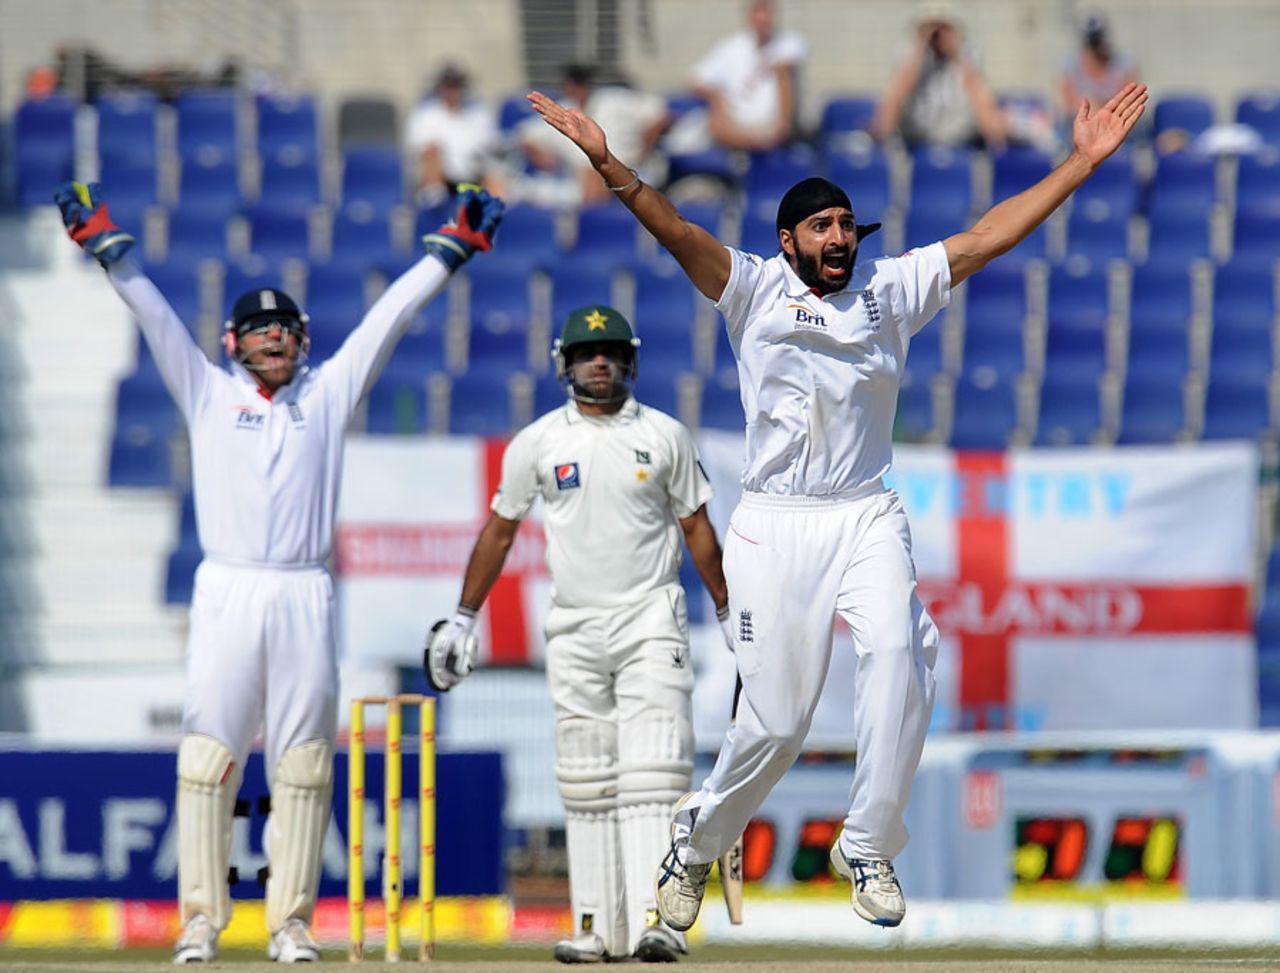 Monty Panesar appeals to have Mohammad Hafeez lbw , Pakistan v England, 2nd Test, Abu Dhabi, 3rd Day, January, 27, 2012